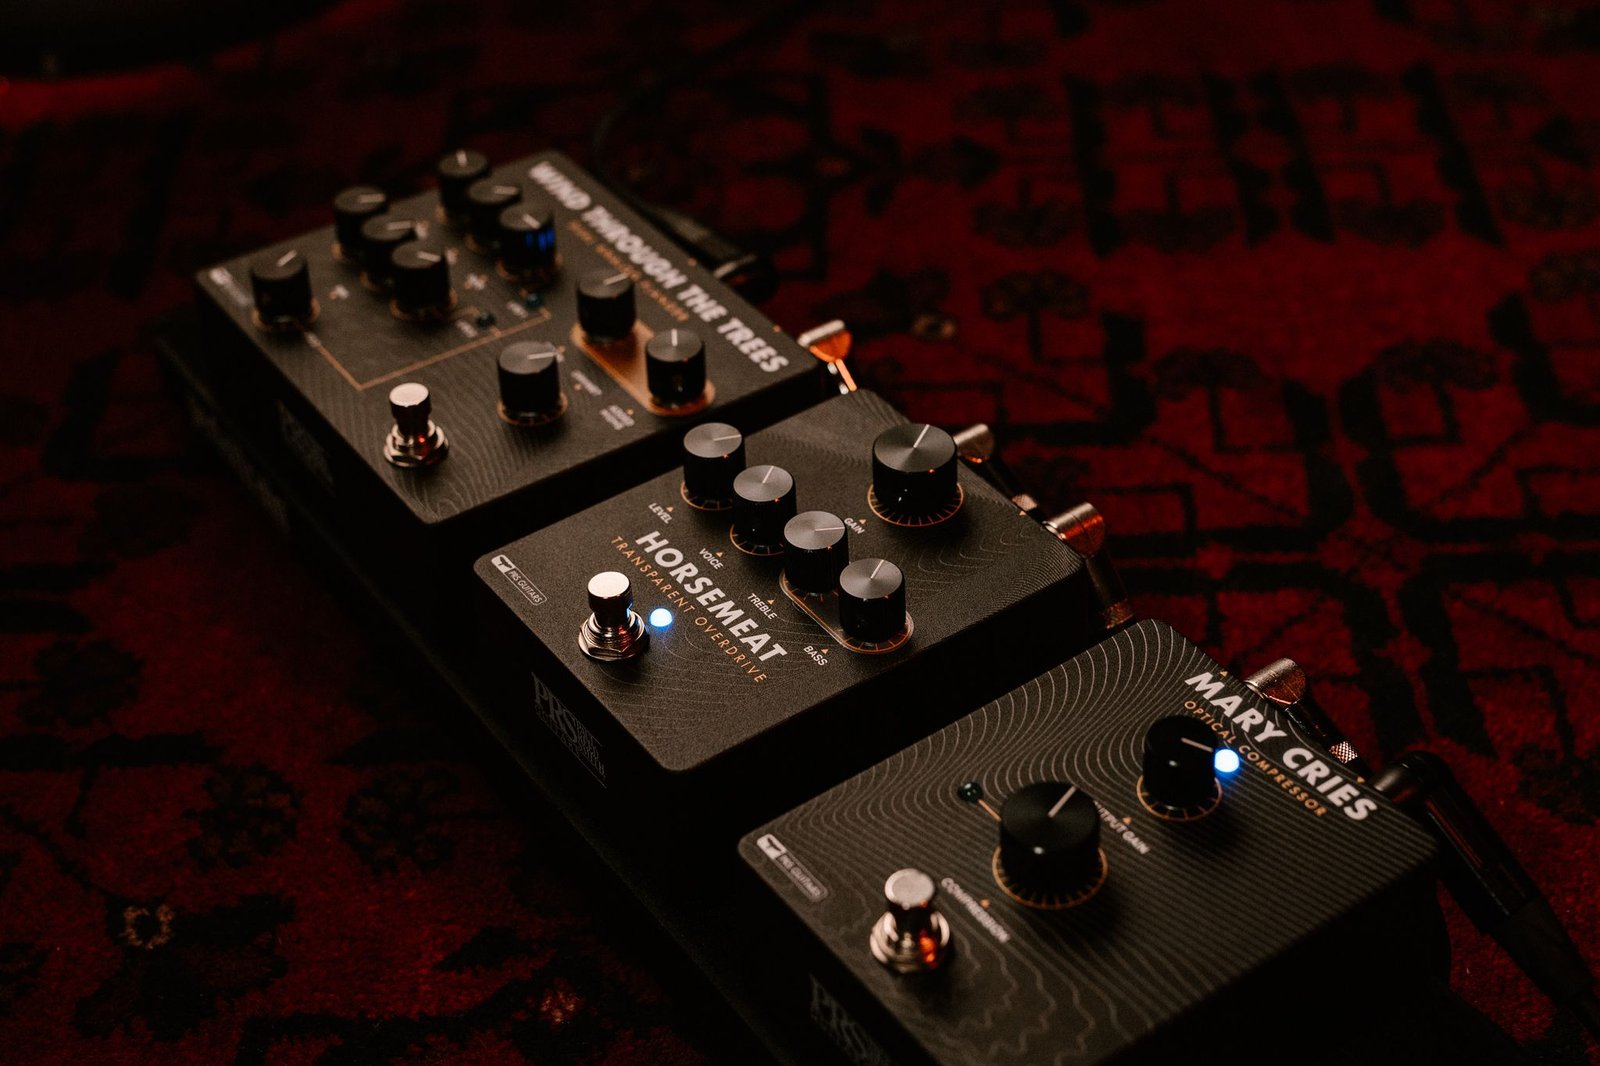 Product Analysis: PRS’s novel pedals are spectacular for their sound quality, simplicity and sturdiness